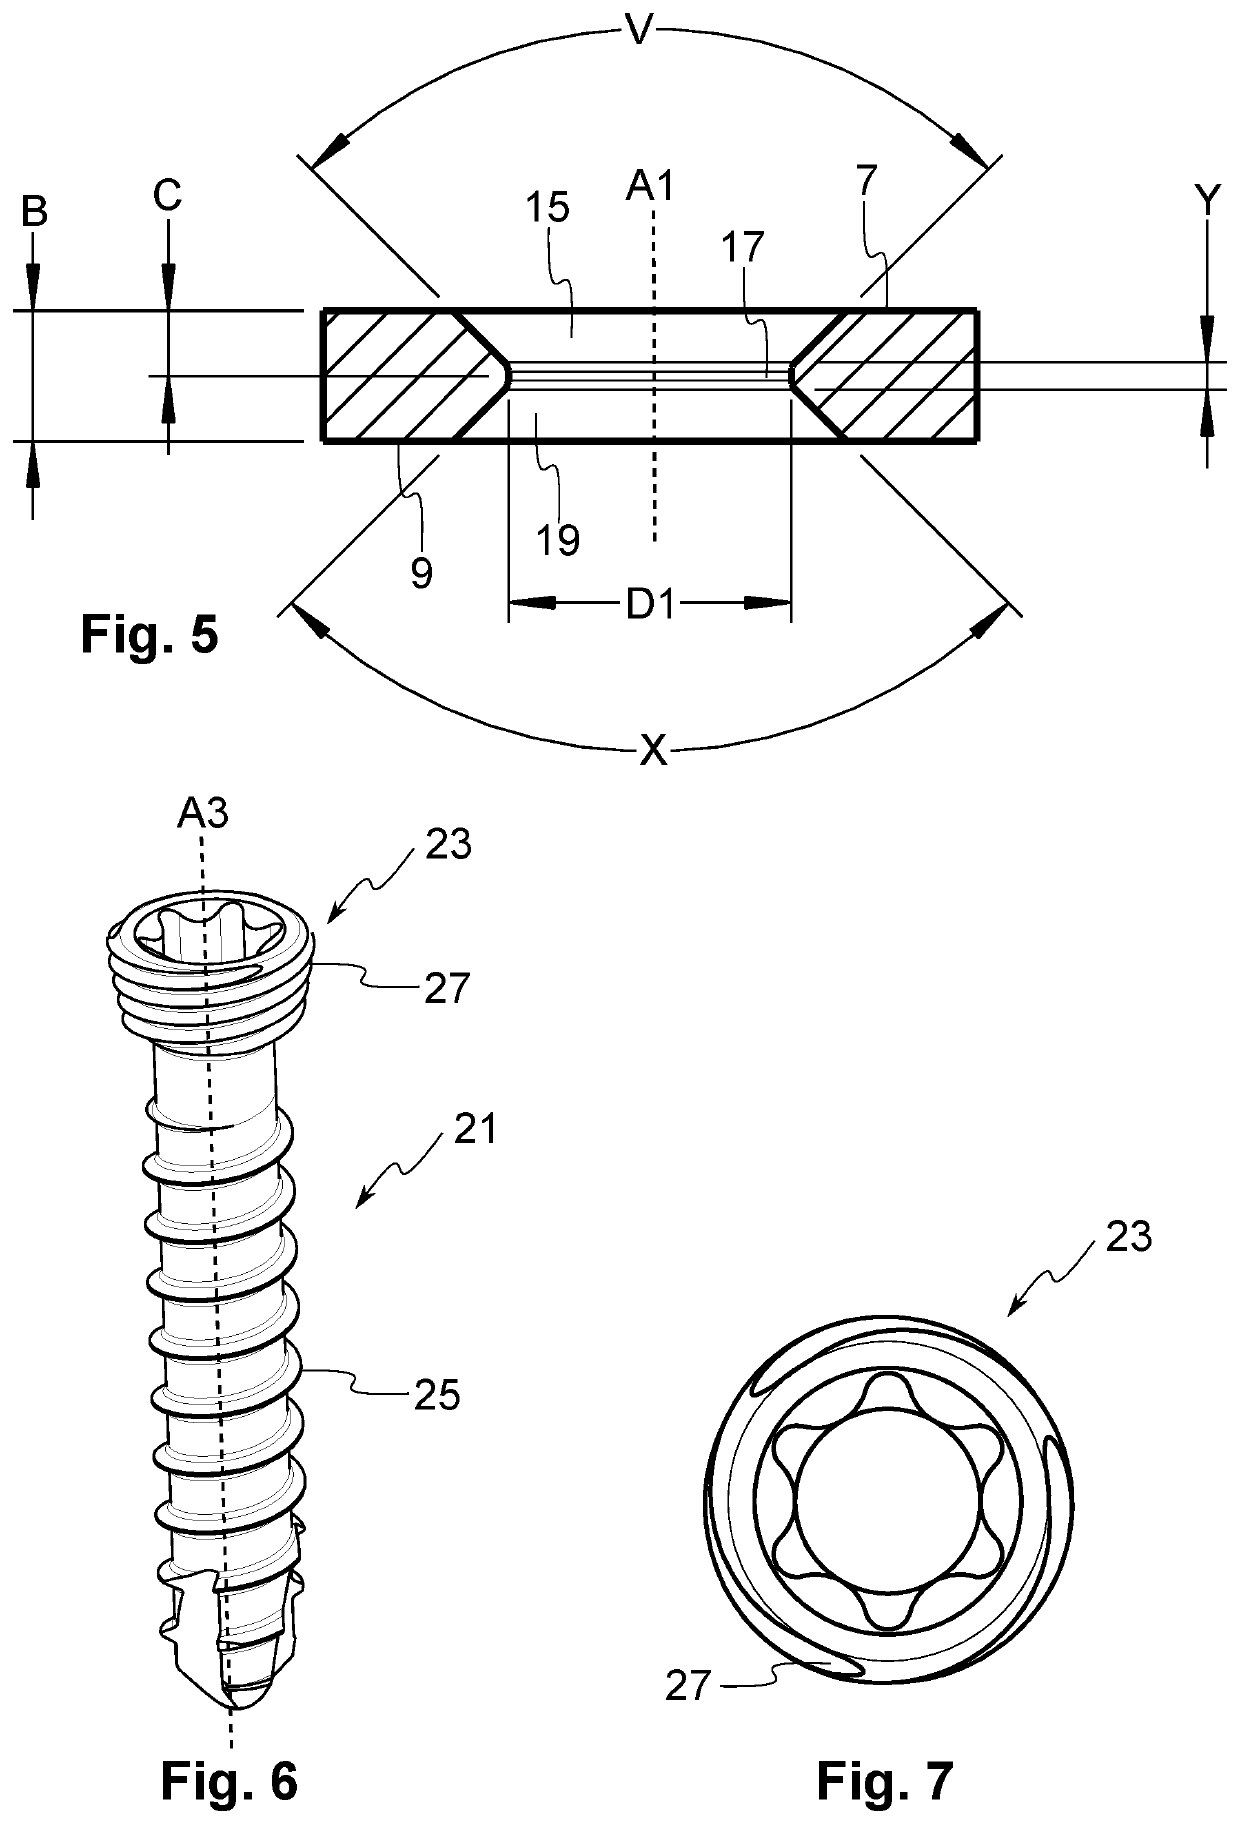 Bone plate system comprising a fastening element having a hard surface